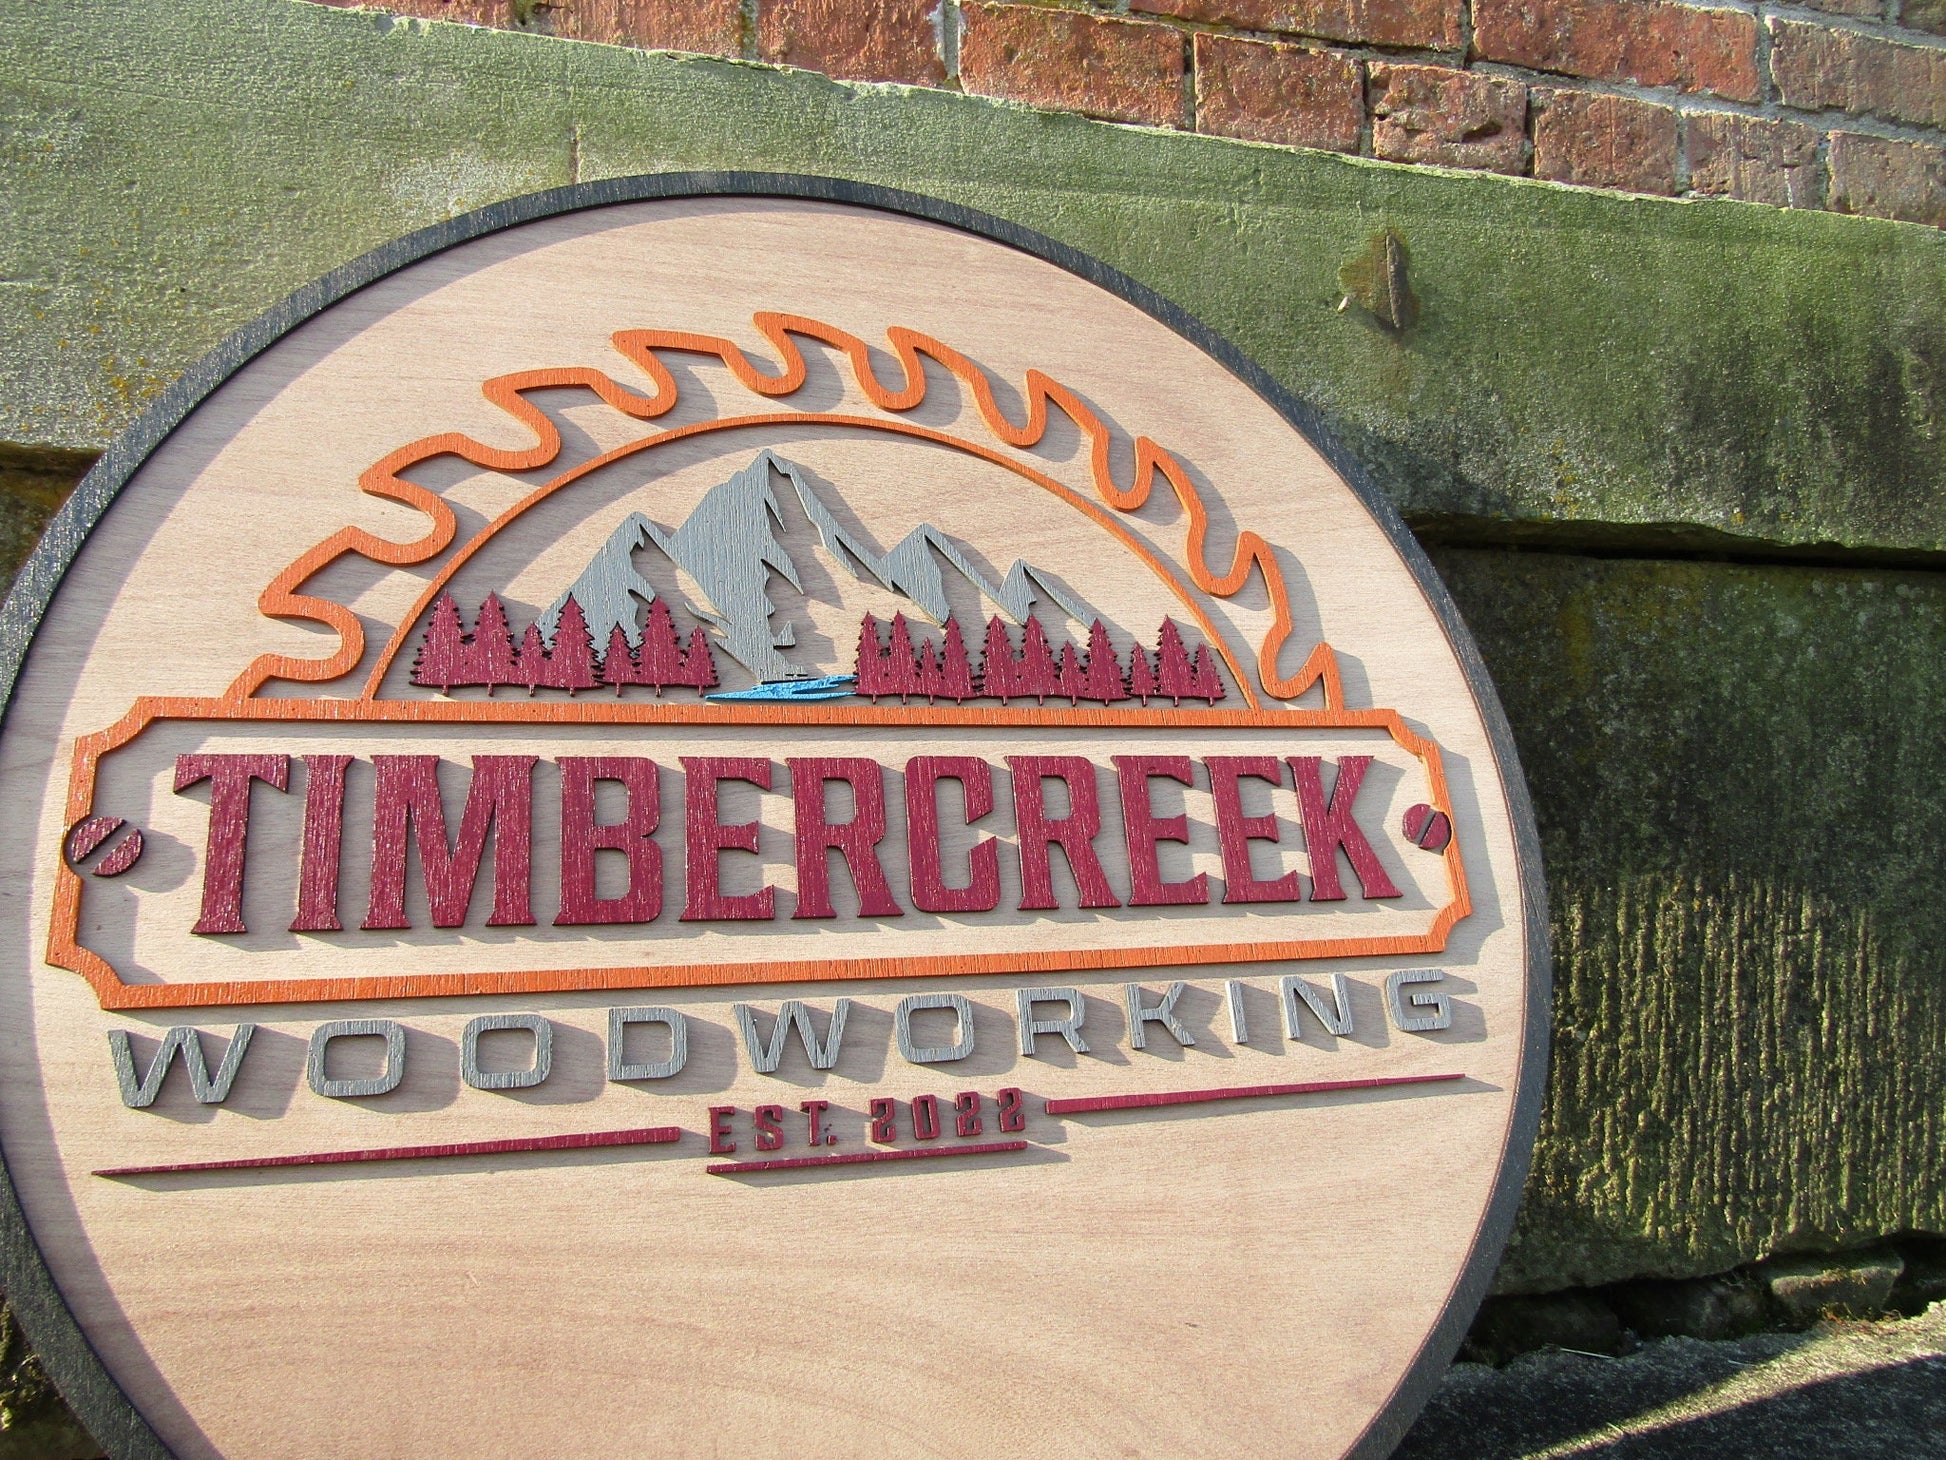 Carpenter Woodworking Mountains Heavy Machinery Timbercreek Outdoors Hiking Mancave Handmade Wood Round Sign Commerical Signage Sawblade